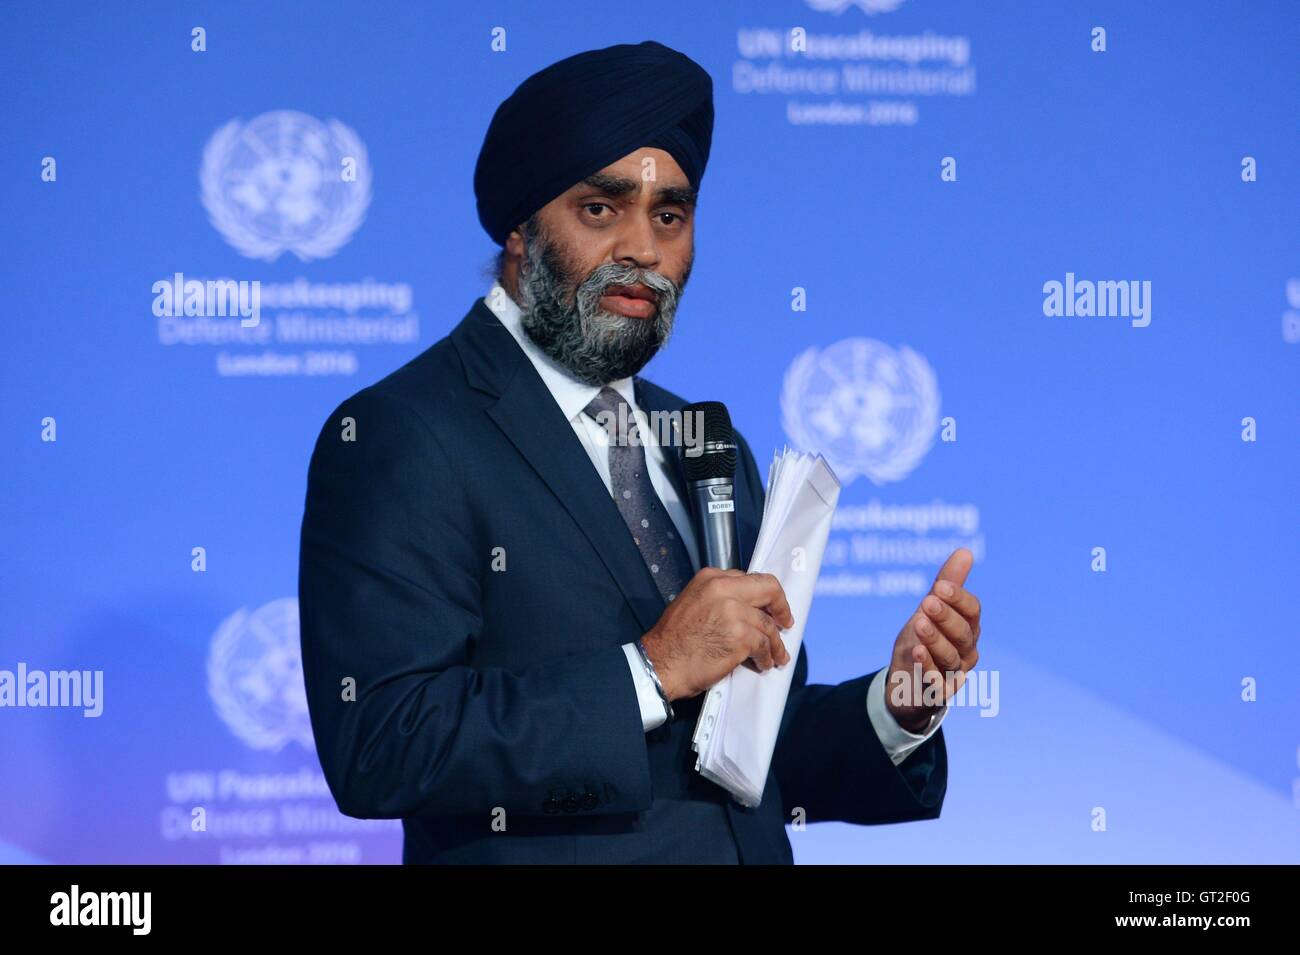 Canadian Minister for National Defence Sajjan Harjit speaks during the UN Peacekeeping Defence Ministerial at Lancaster House in London. Stock Photo